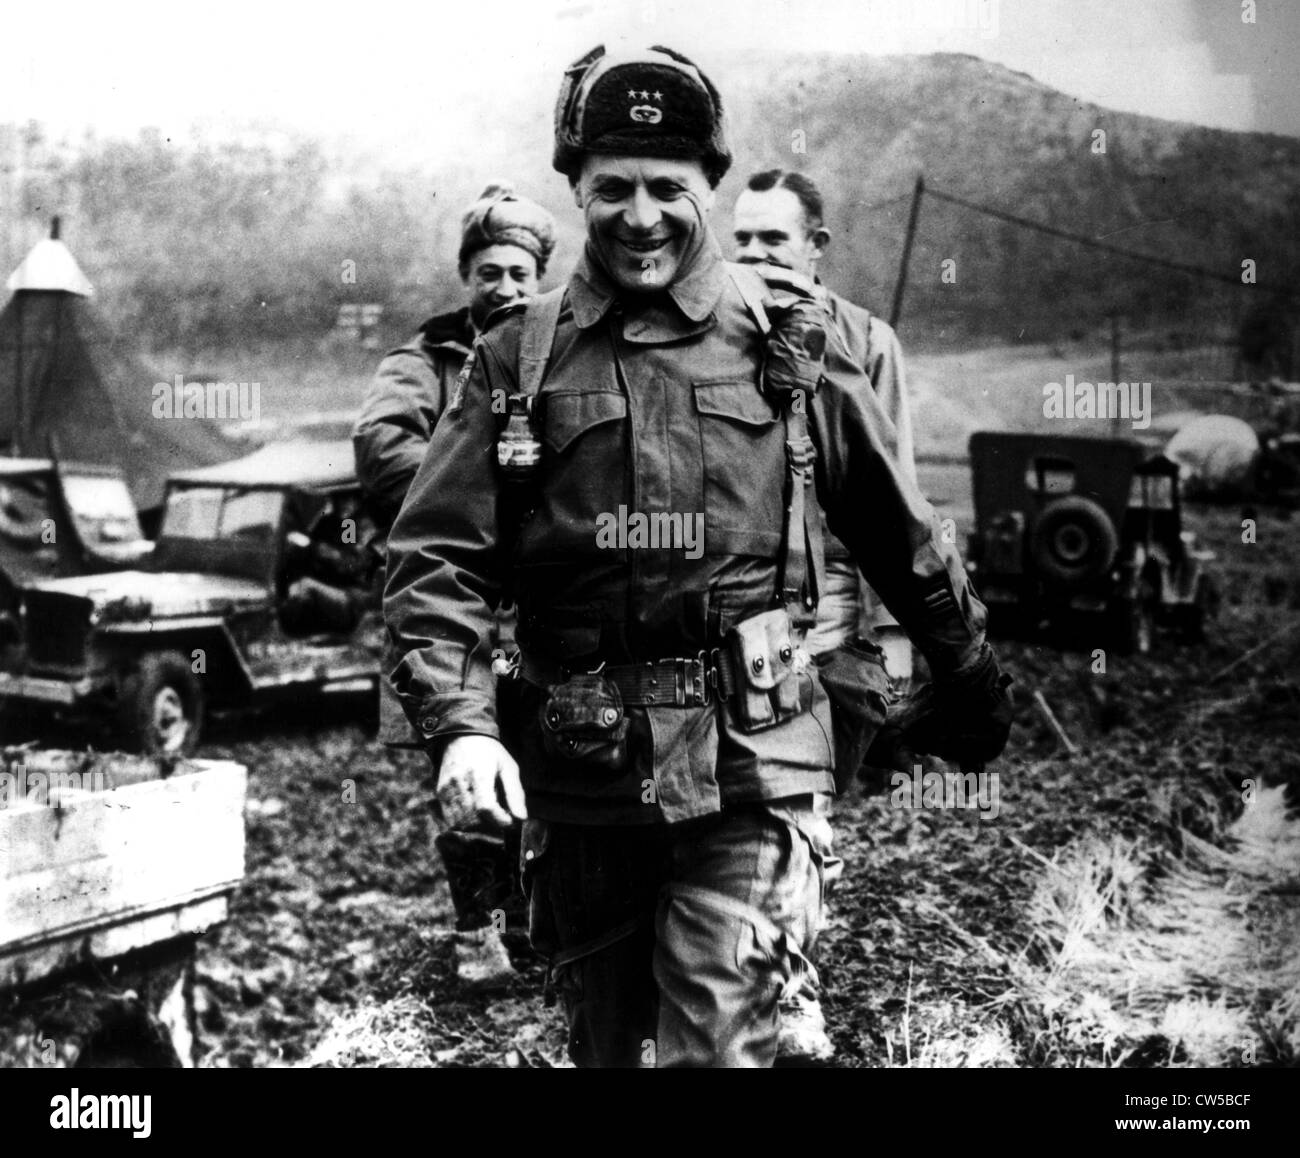 Korean War, General Ridgway, commander-in-chief of the 8th Army in Korea Stock Photo